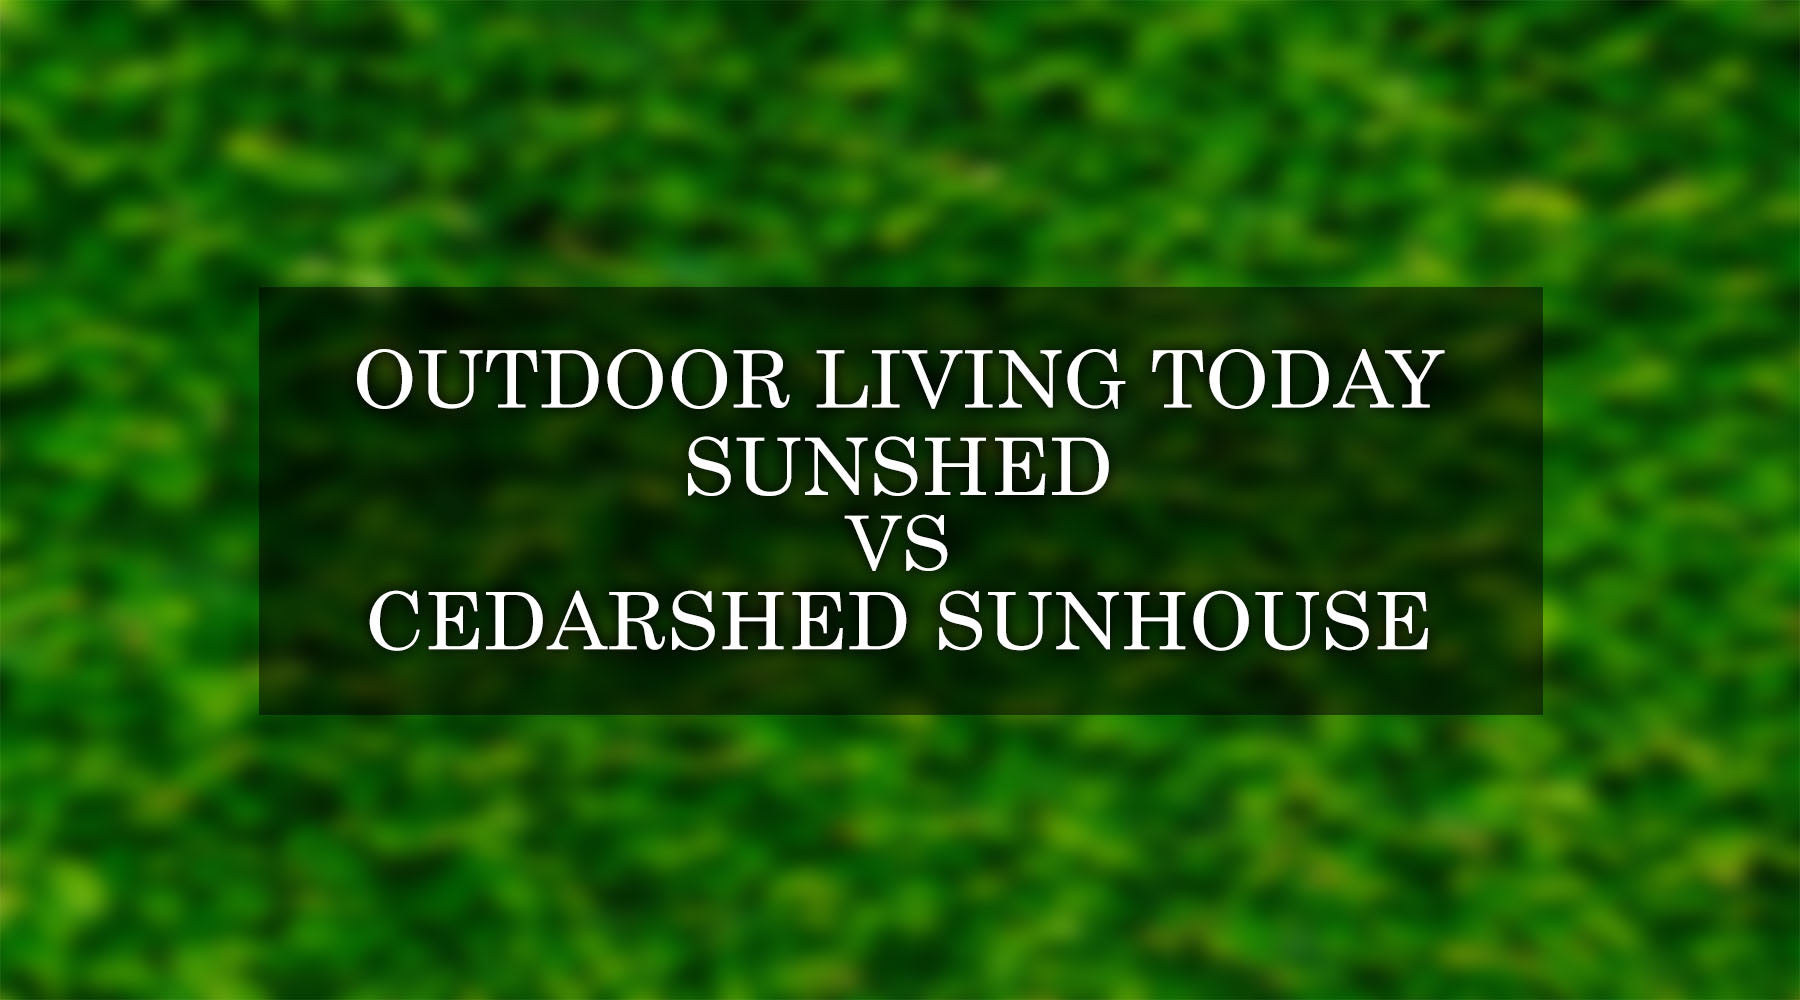 Comparing Outdoor Living Today Sunshed and Cedarshed Sunhouse